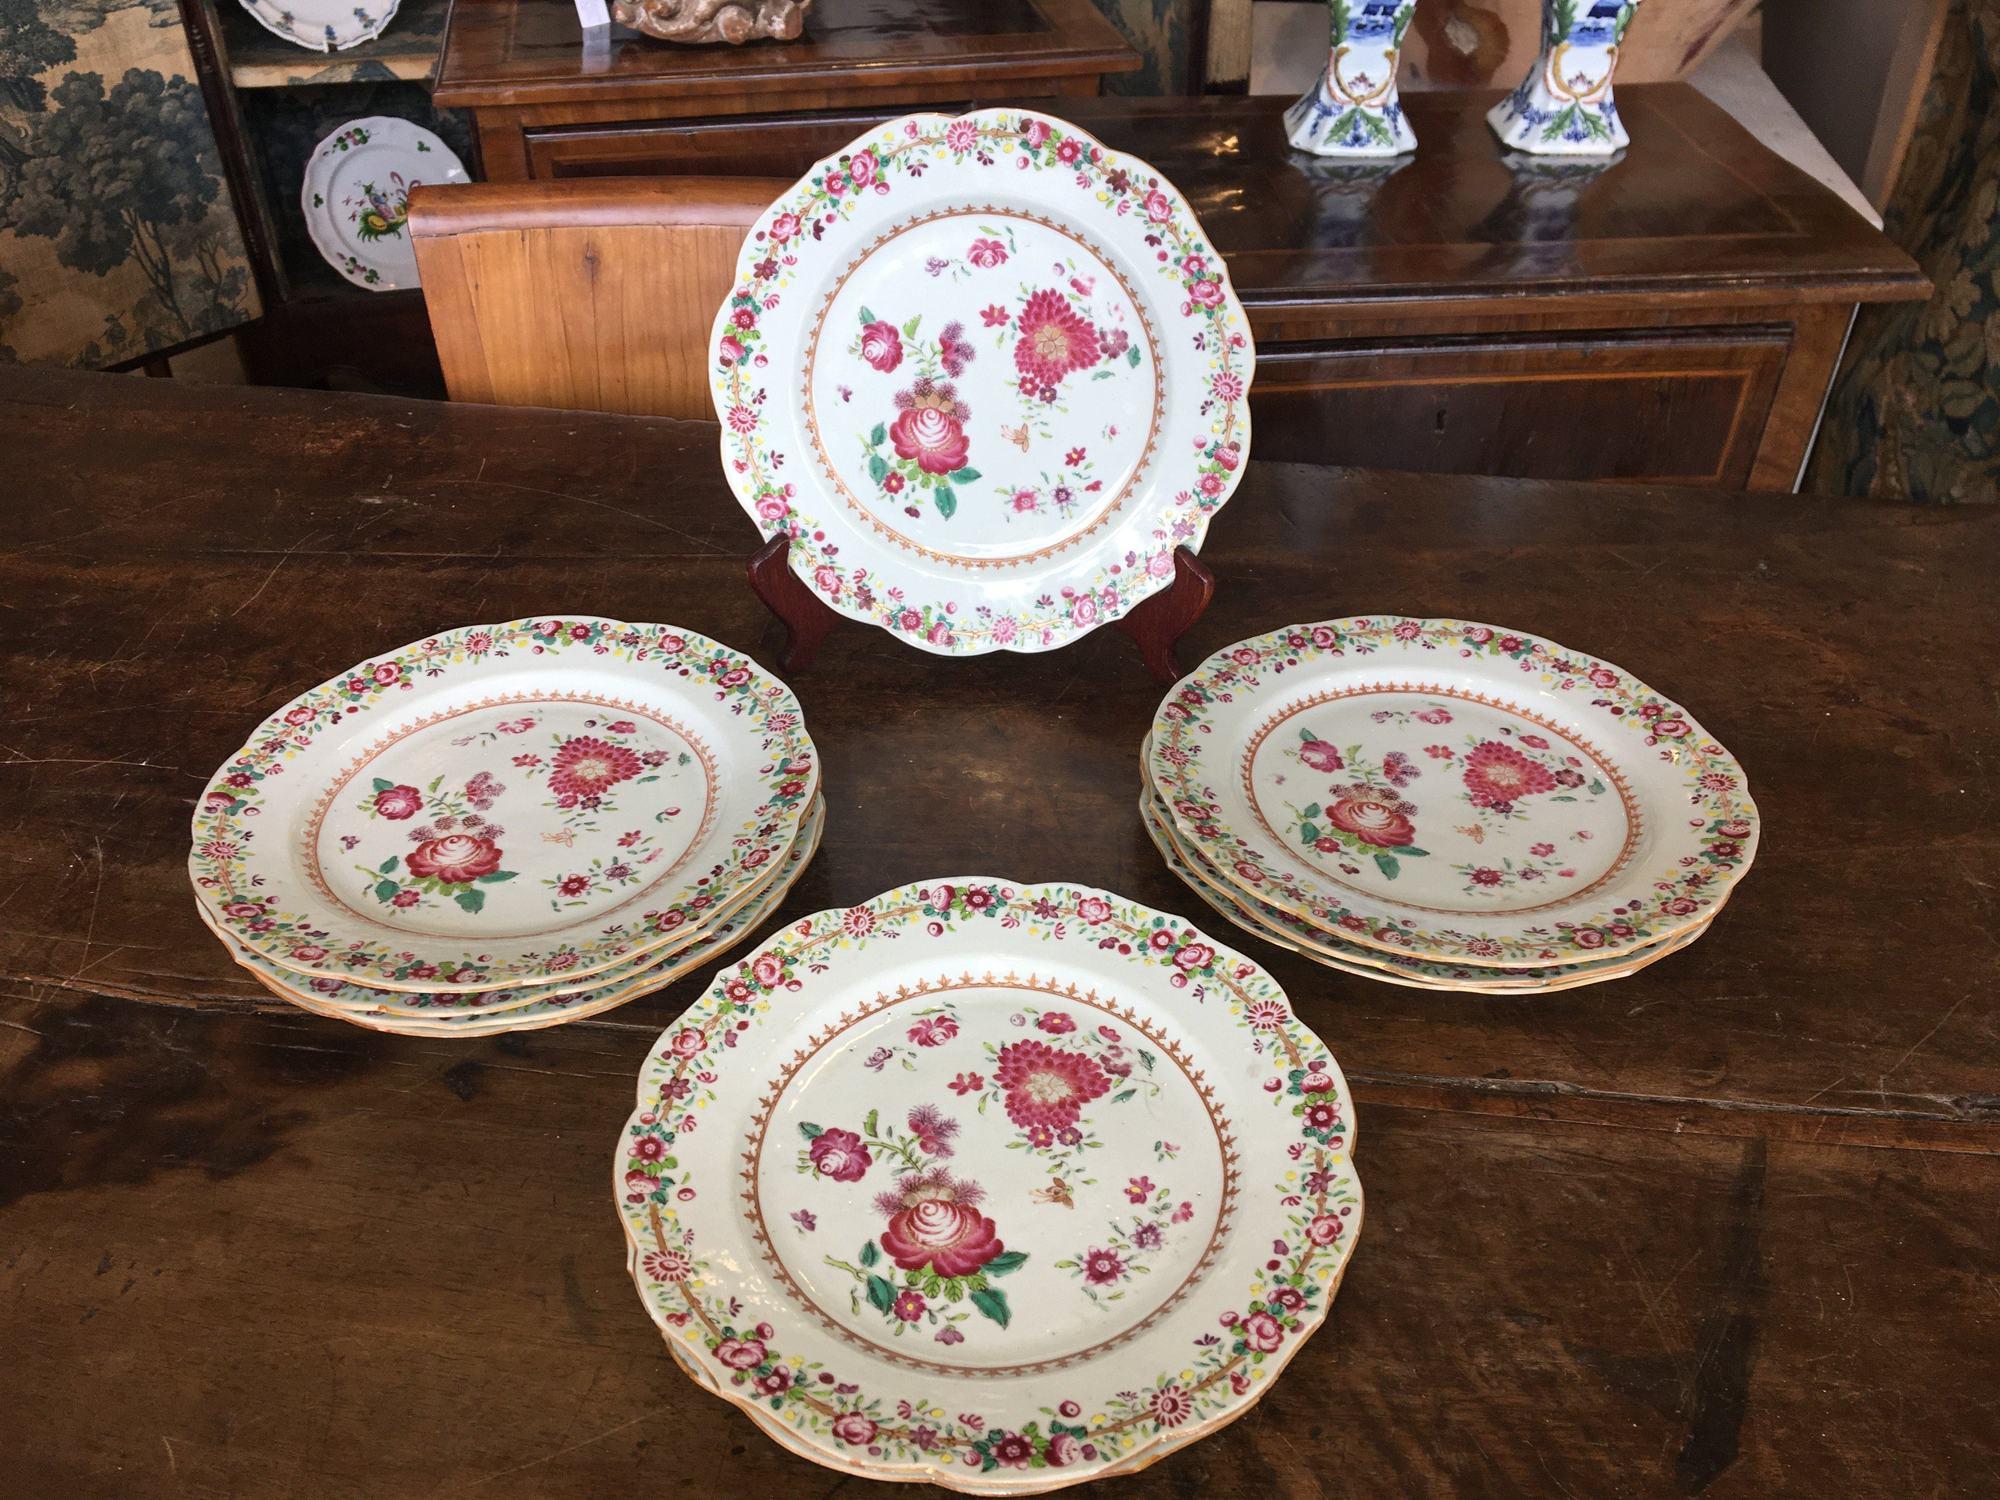 Set of 10 outstanding Chinese export plates, circa 1760, famille rose in excellent condition, 4 restored.